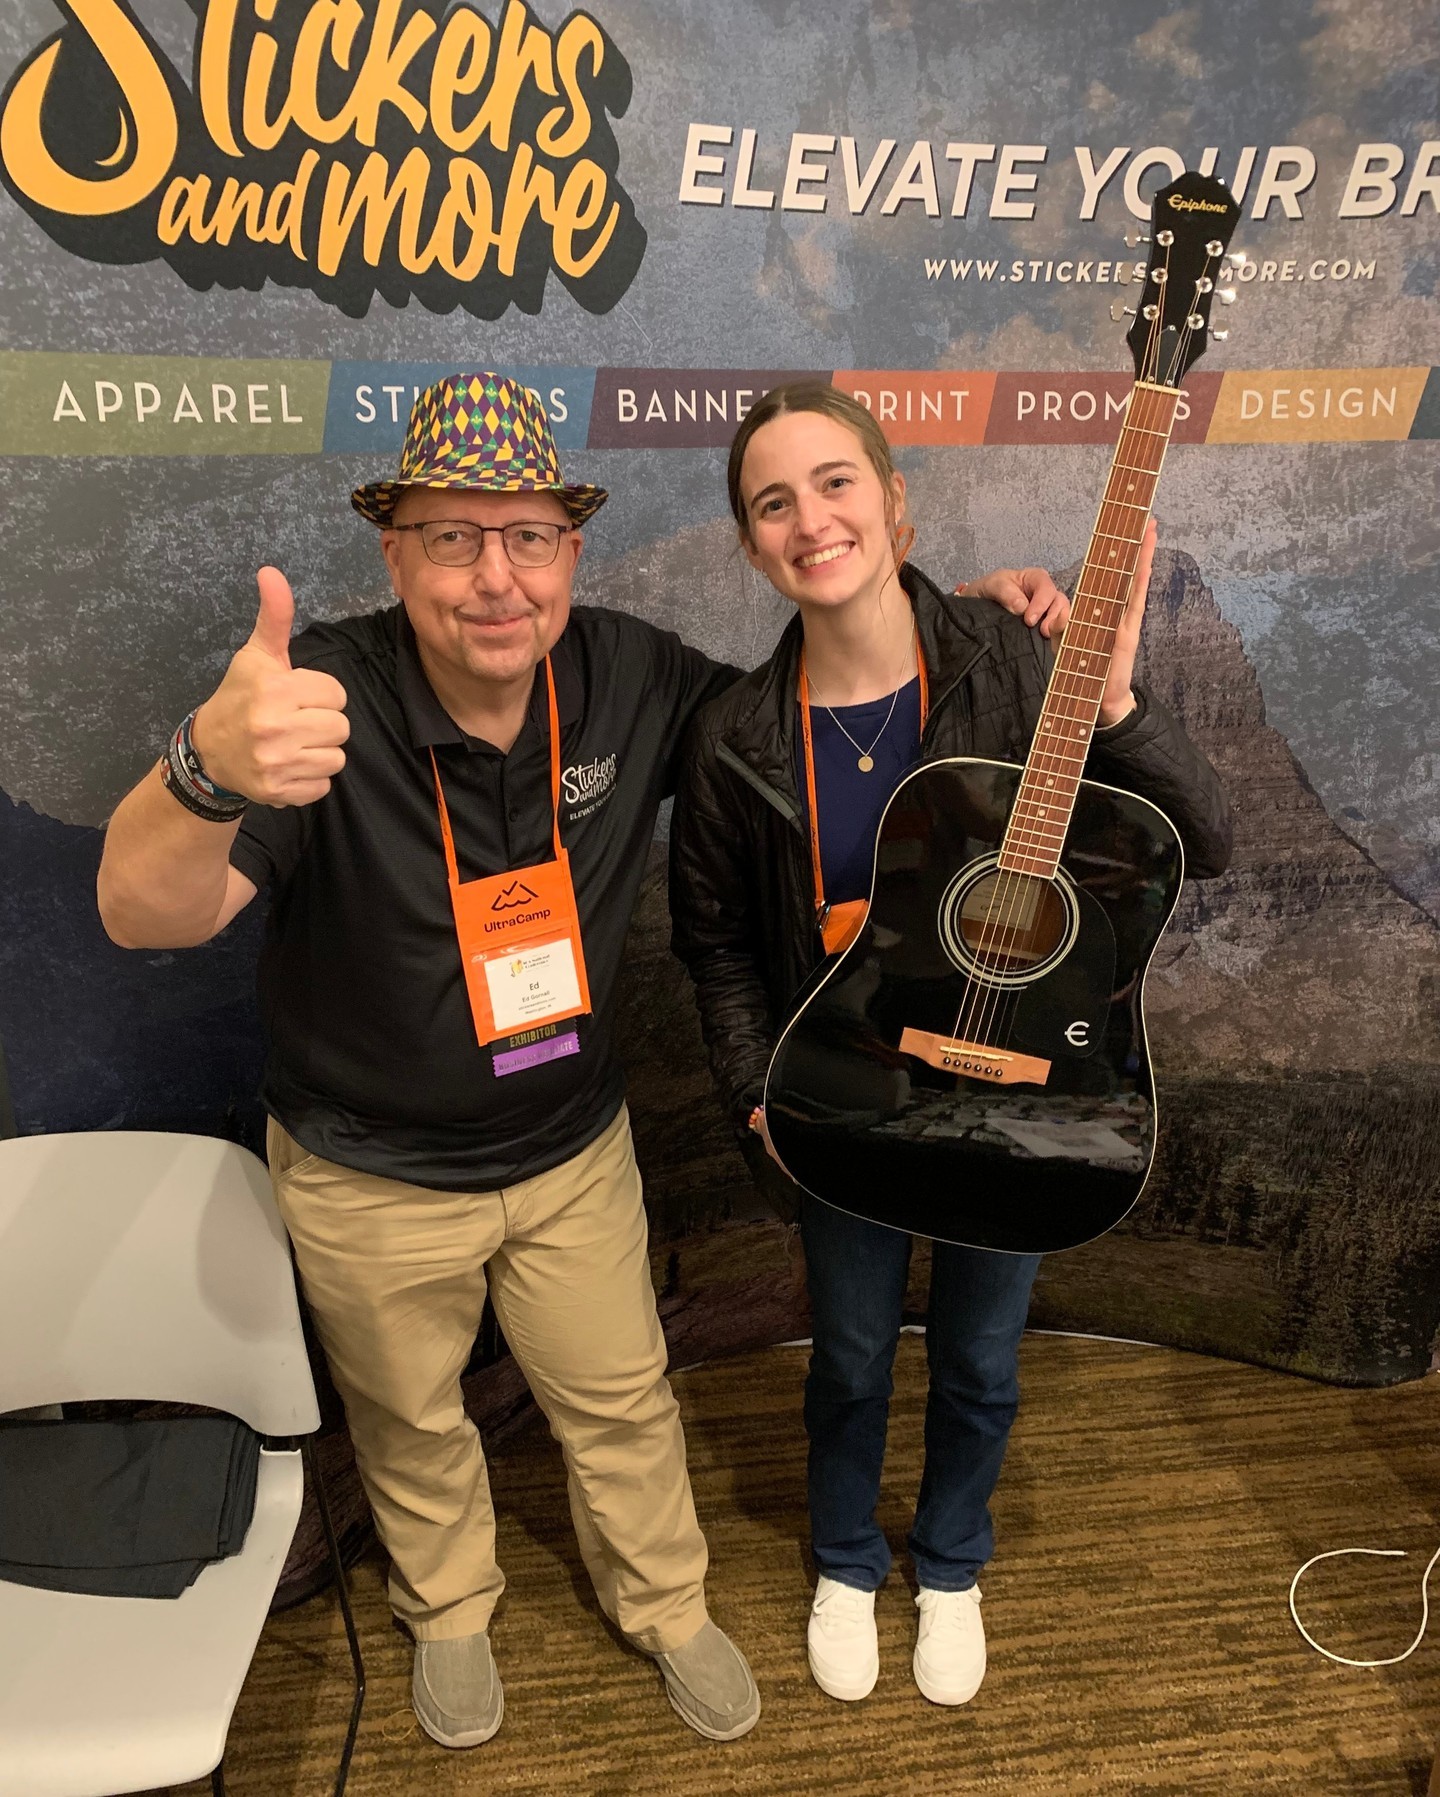 And our American Camp Association New Orleans conference winner is... 

🥁 🥁 🥁

Courtney Foster from Clemson University Youth Development Leadership our of Pickens, SC! 

#StickersAndMore 
#ElevateYourBrand